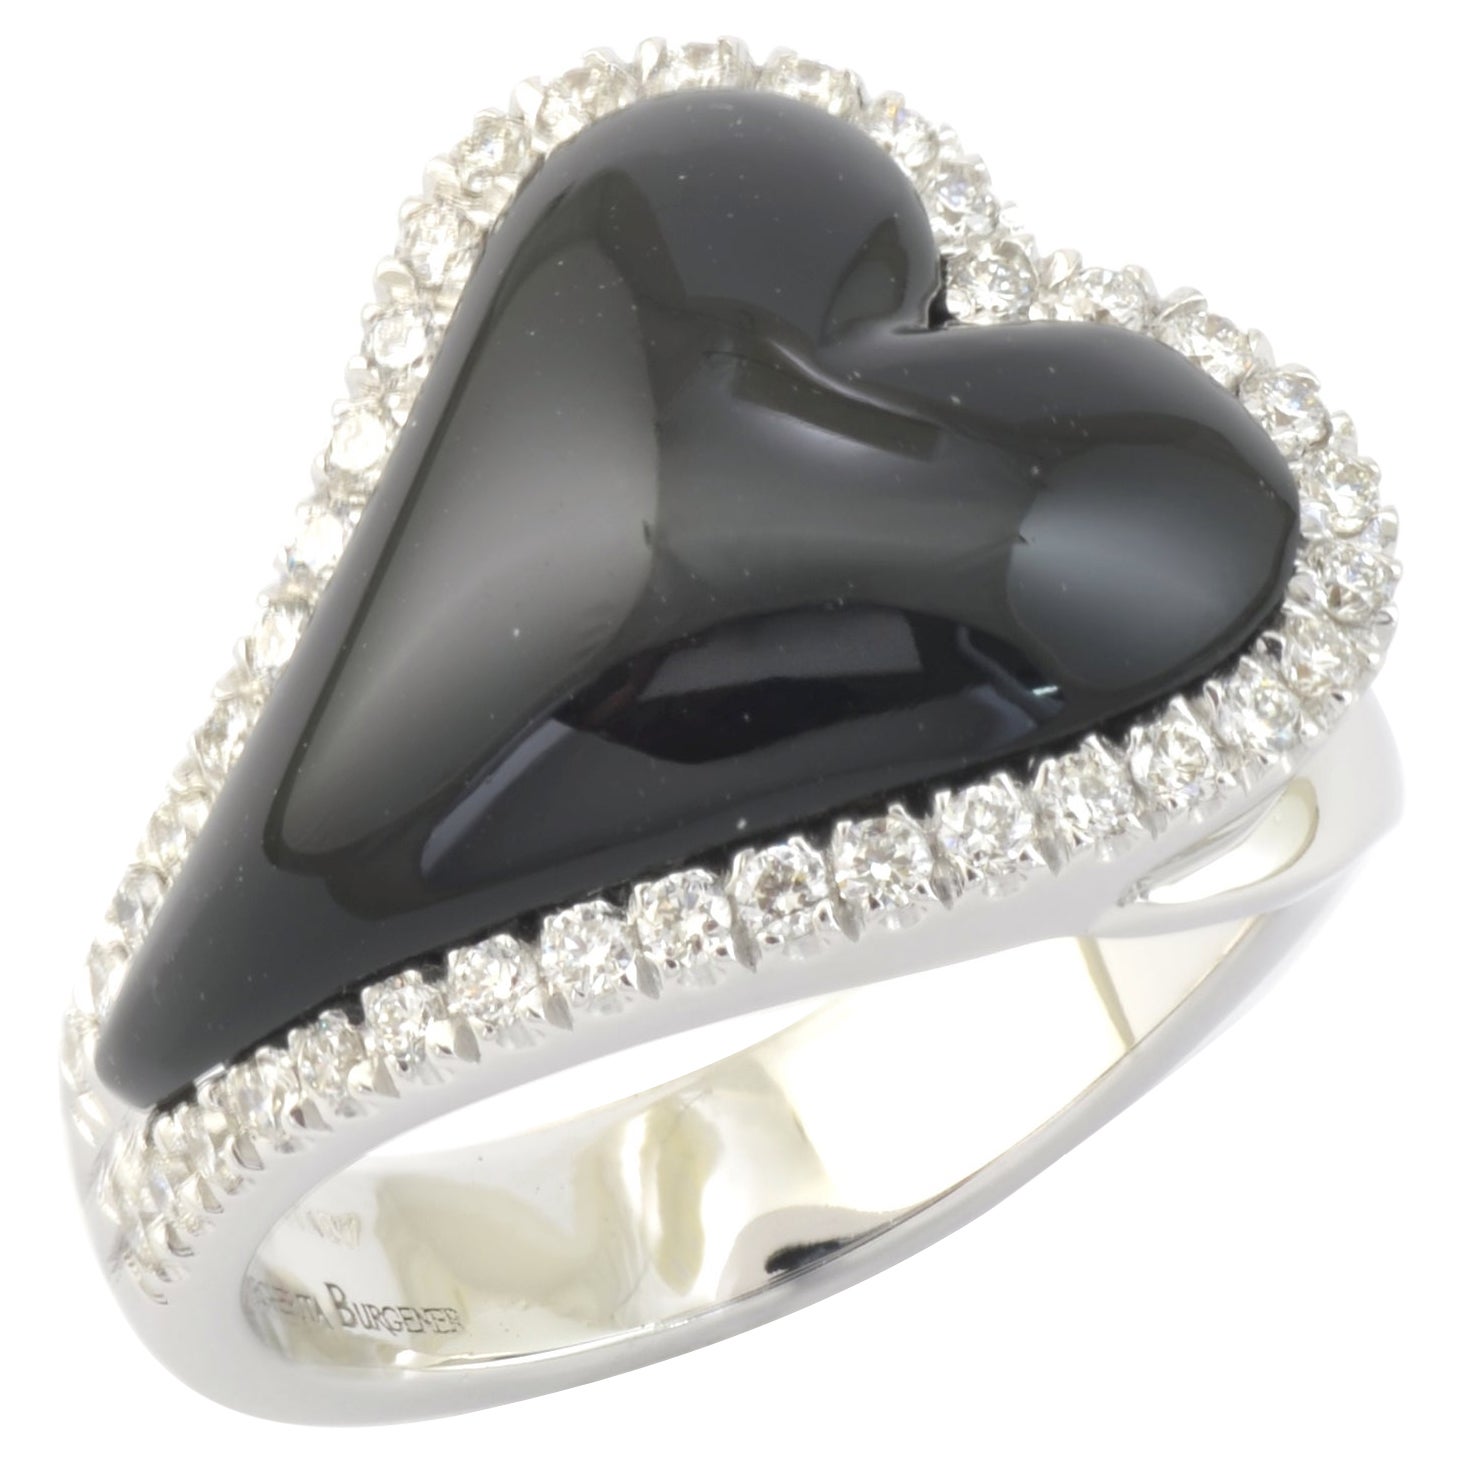 Diamants Onyx Or blanc 18 Kt Made in Italy Bague coeur